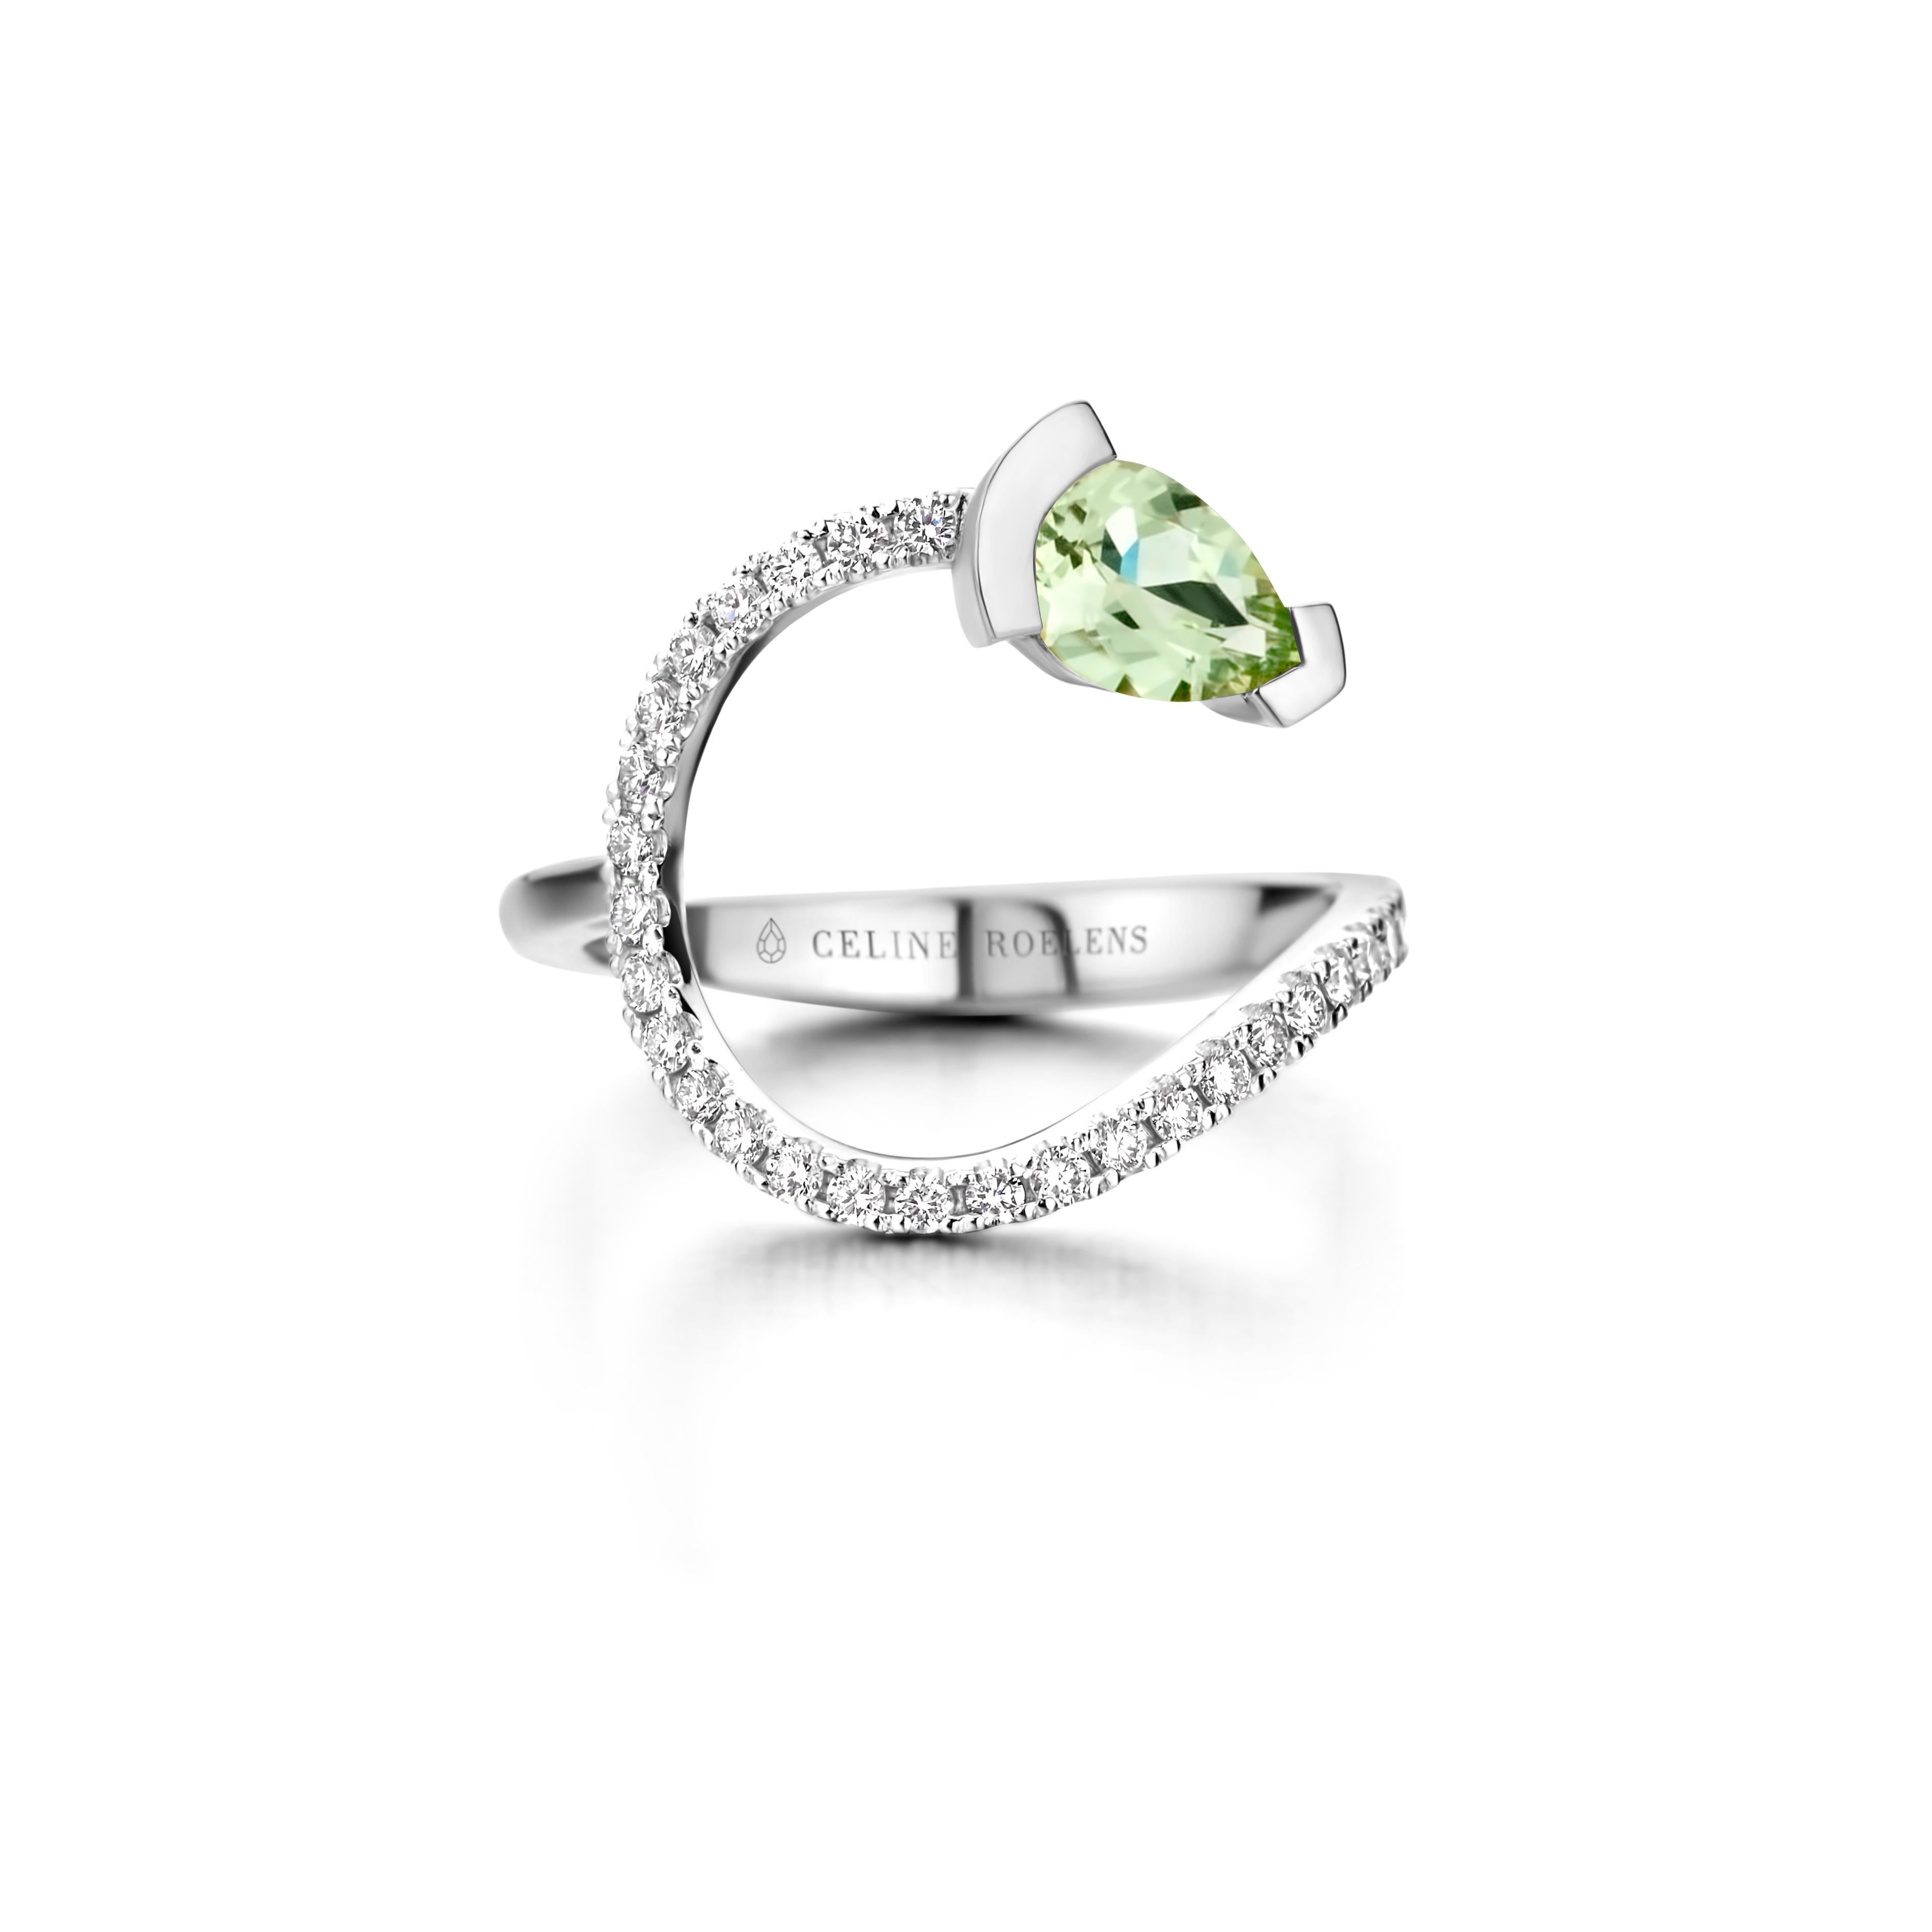 ADELINE curved ring in 18Kt rose gold set with a pear shaped Green beryl and 0,33 Ct of white brilliant cut diamonds - VS F quality.